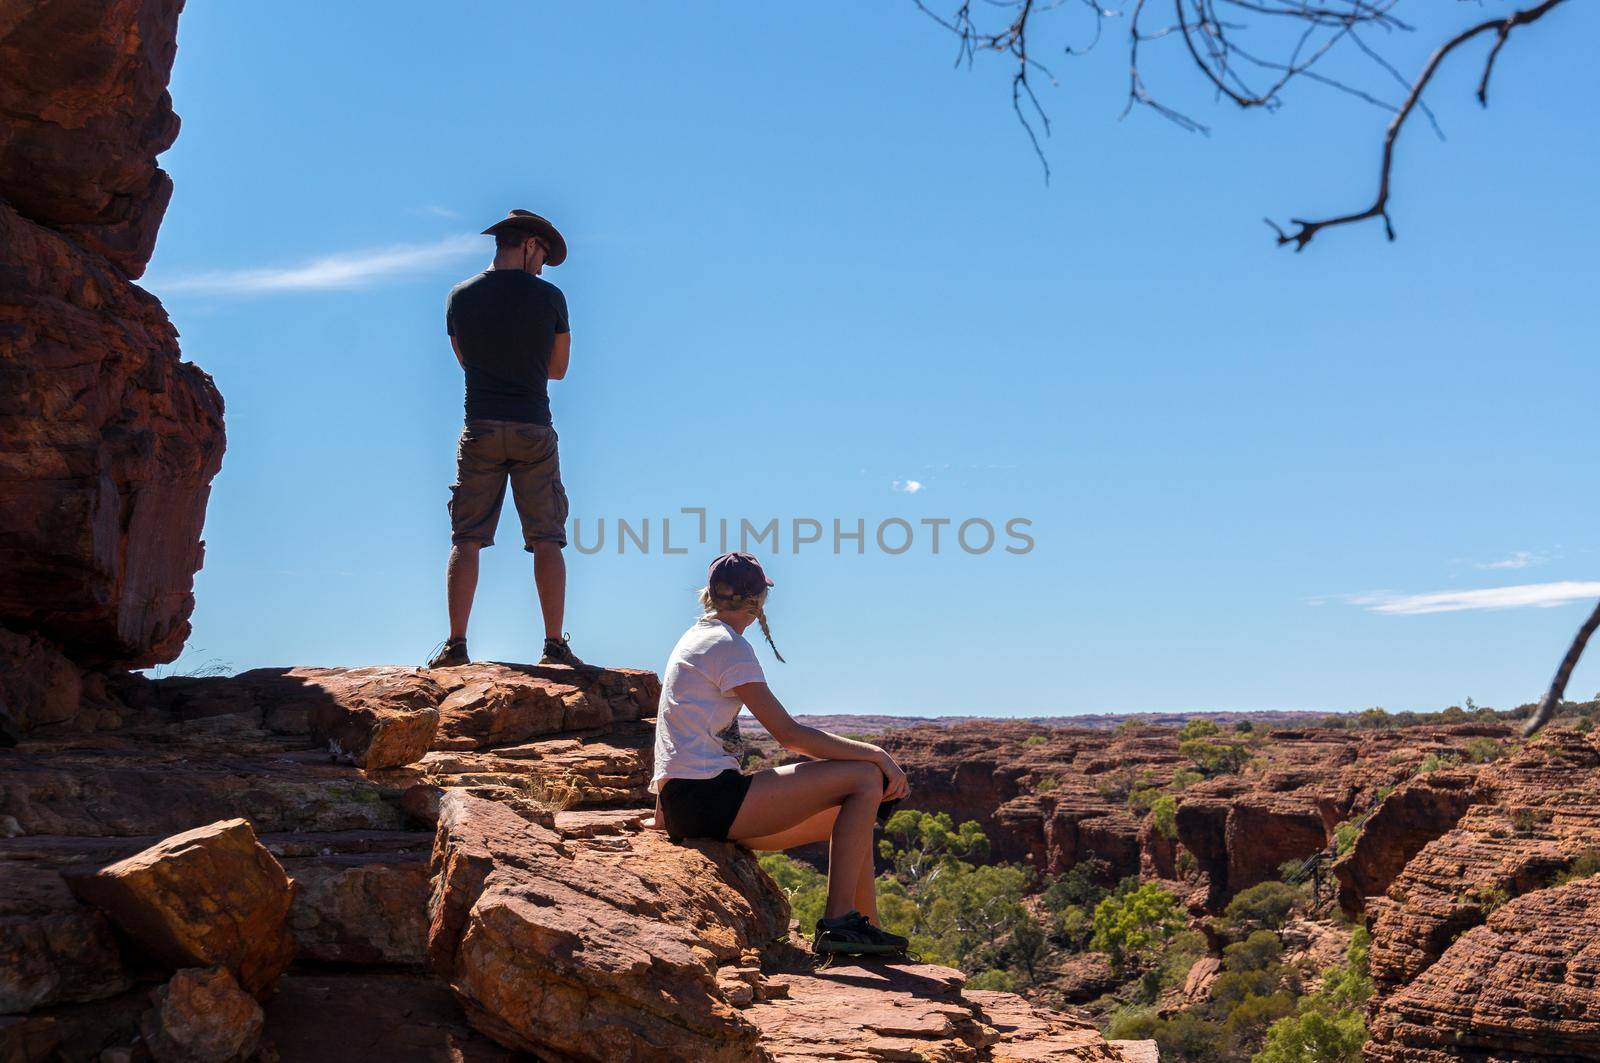 KINGS CANYON, AUSTRALIA May 5, 2015: young women and man enyoing view of the Kings Canyon, Watarrka National Park by bettercallcurry